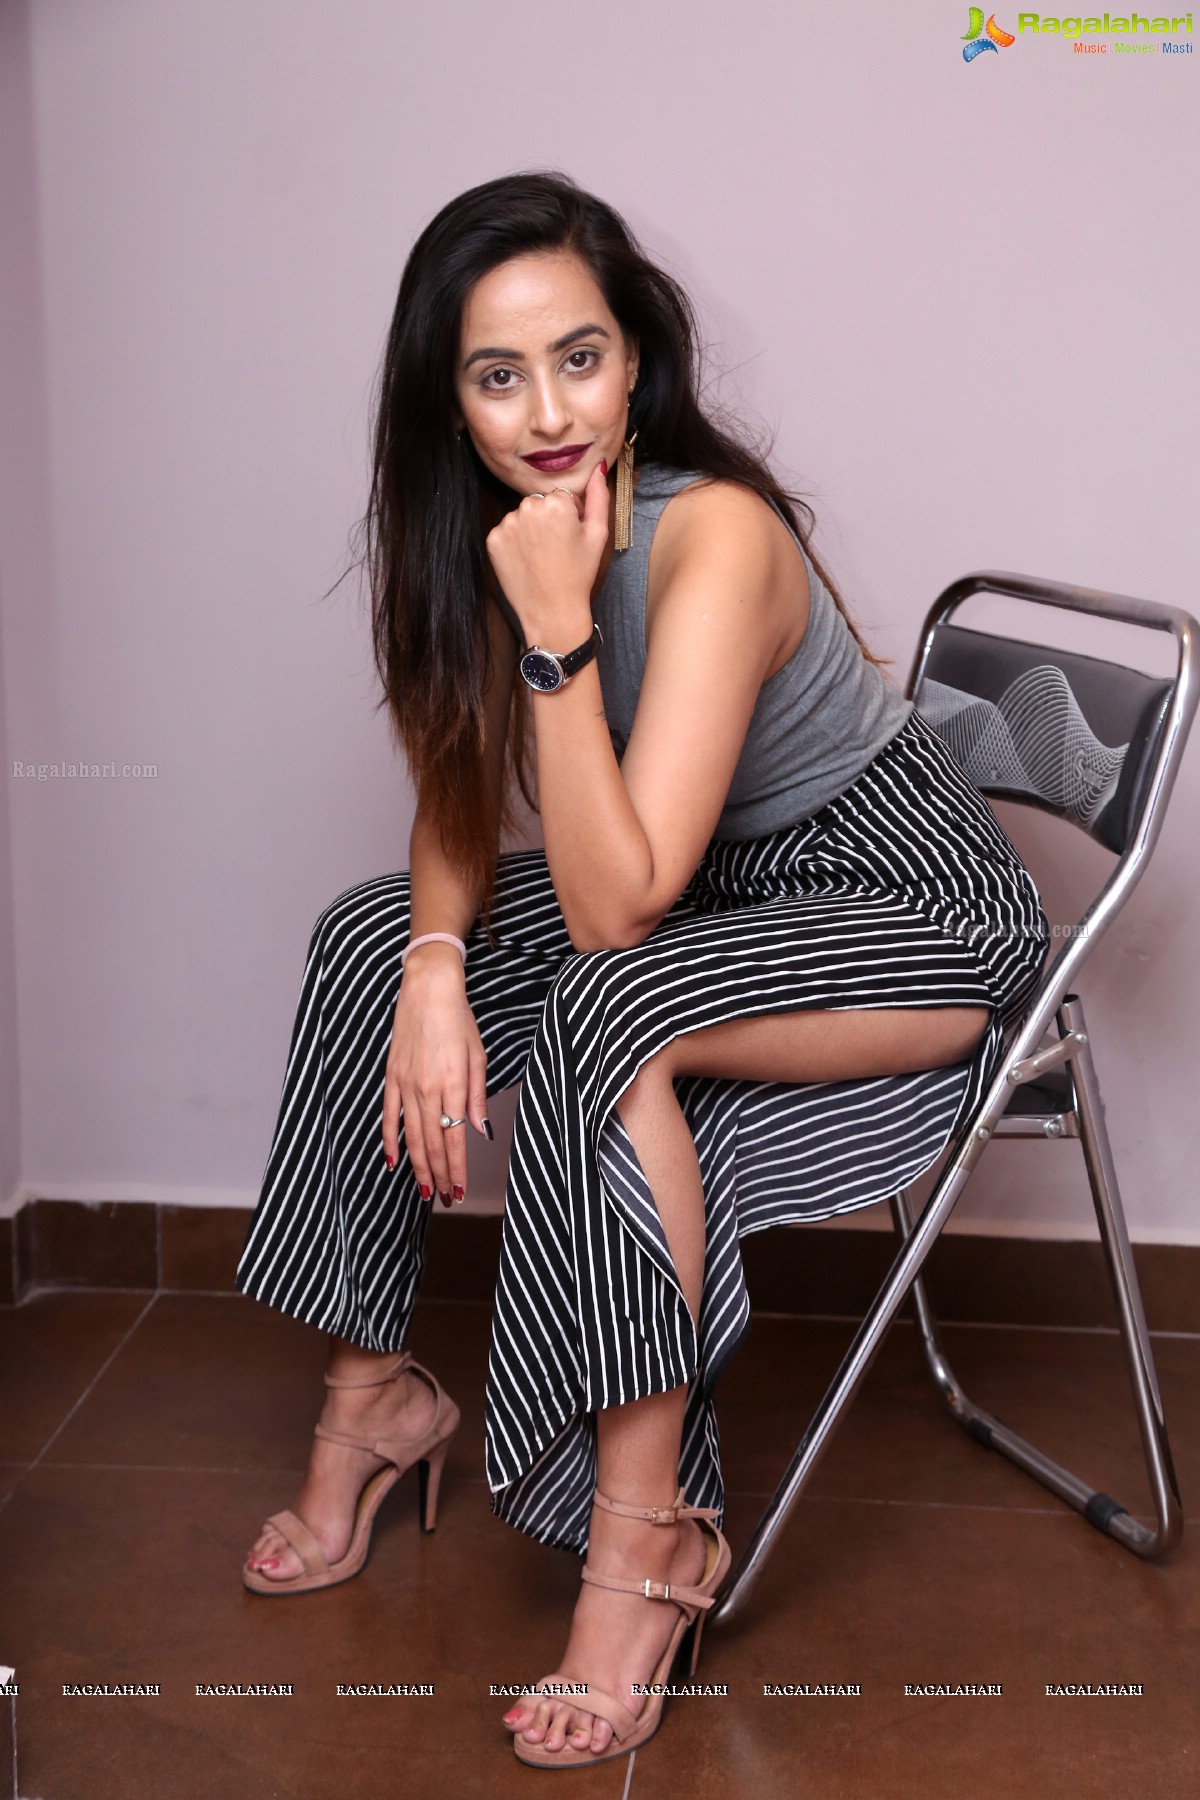 Ameeksha Amy Pawar at Shapes Style Lounge Get Together Party